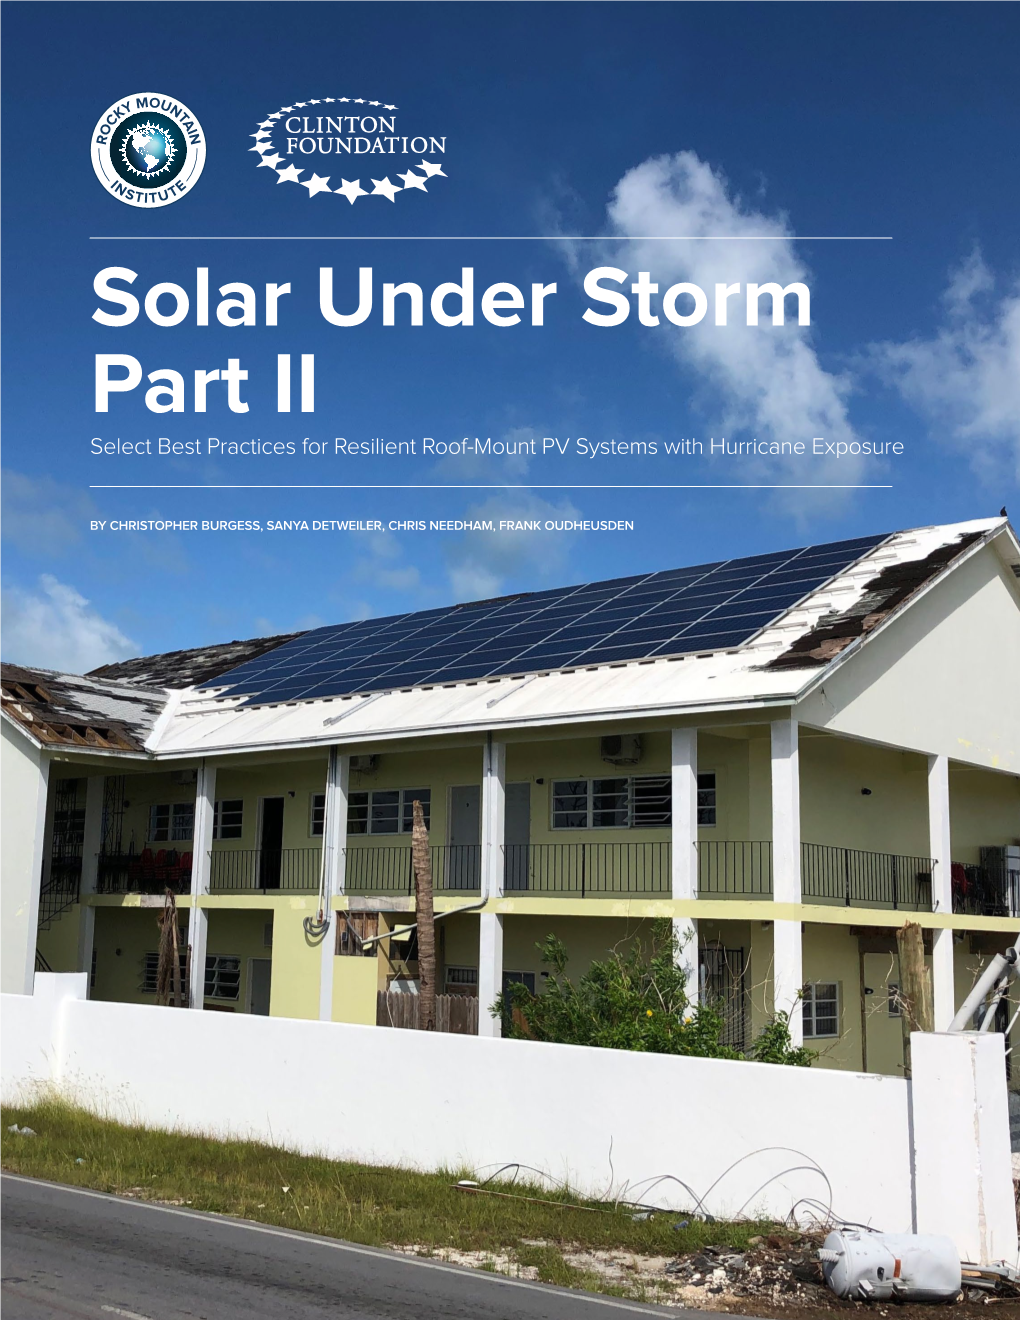 Solar Under Storm Part II Select Best Practices for Resilient Roof-Mount PV Systems with Hurricane Exposure